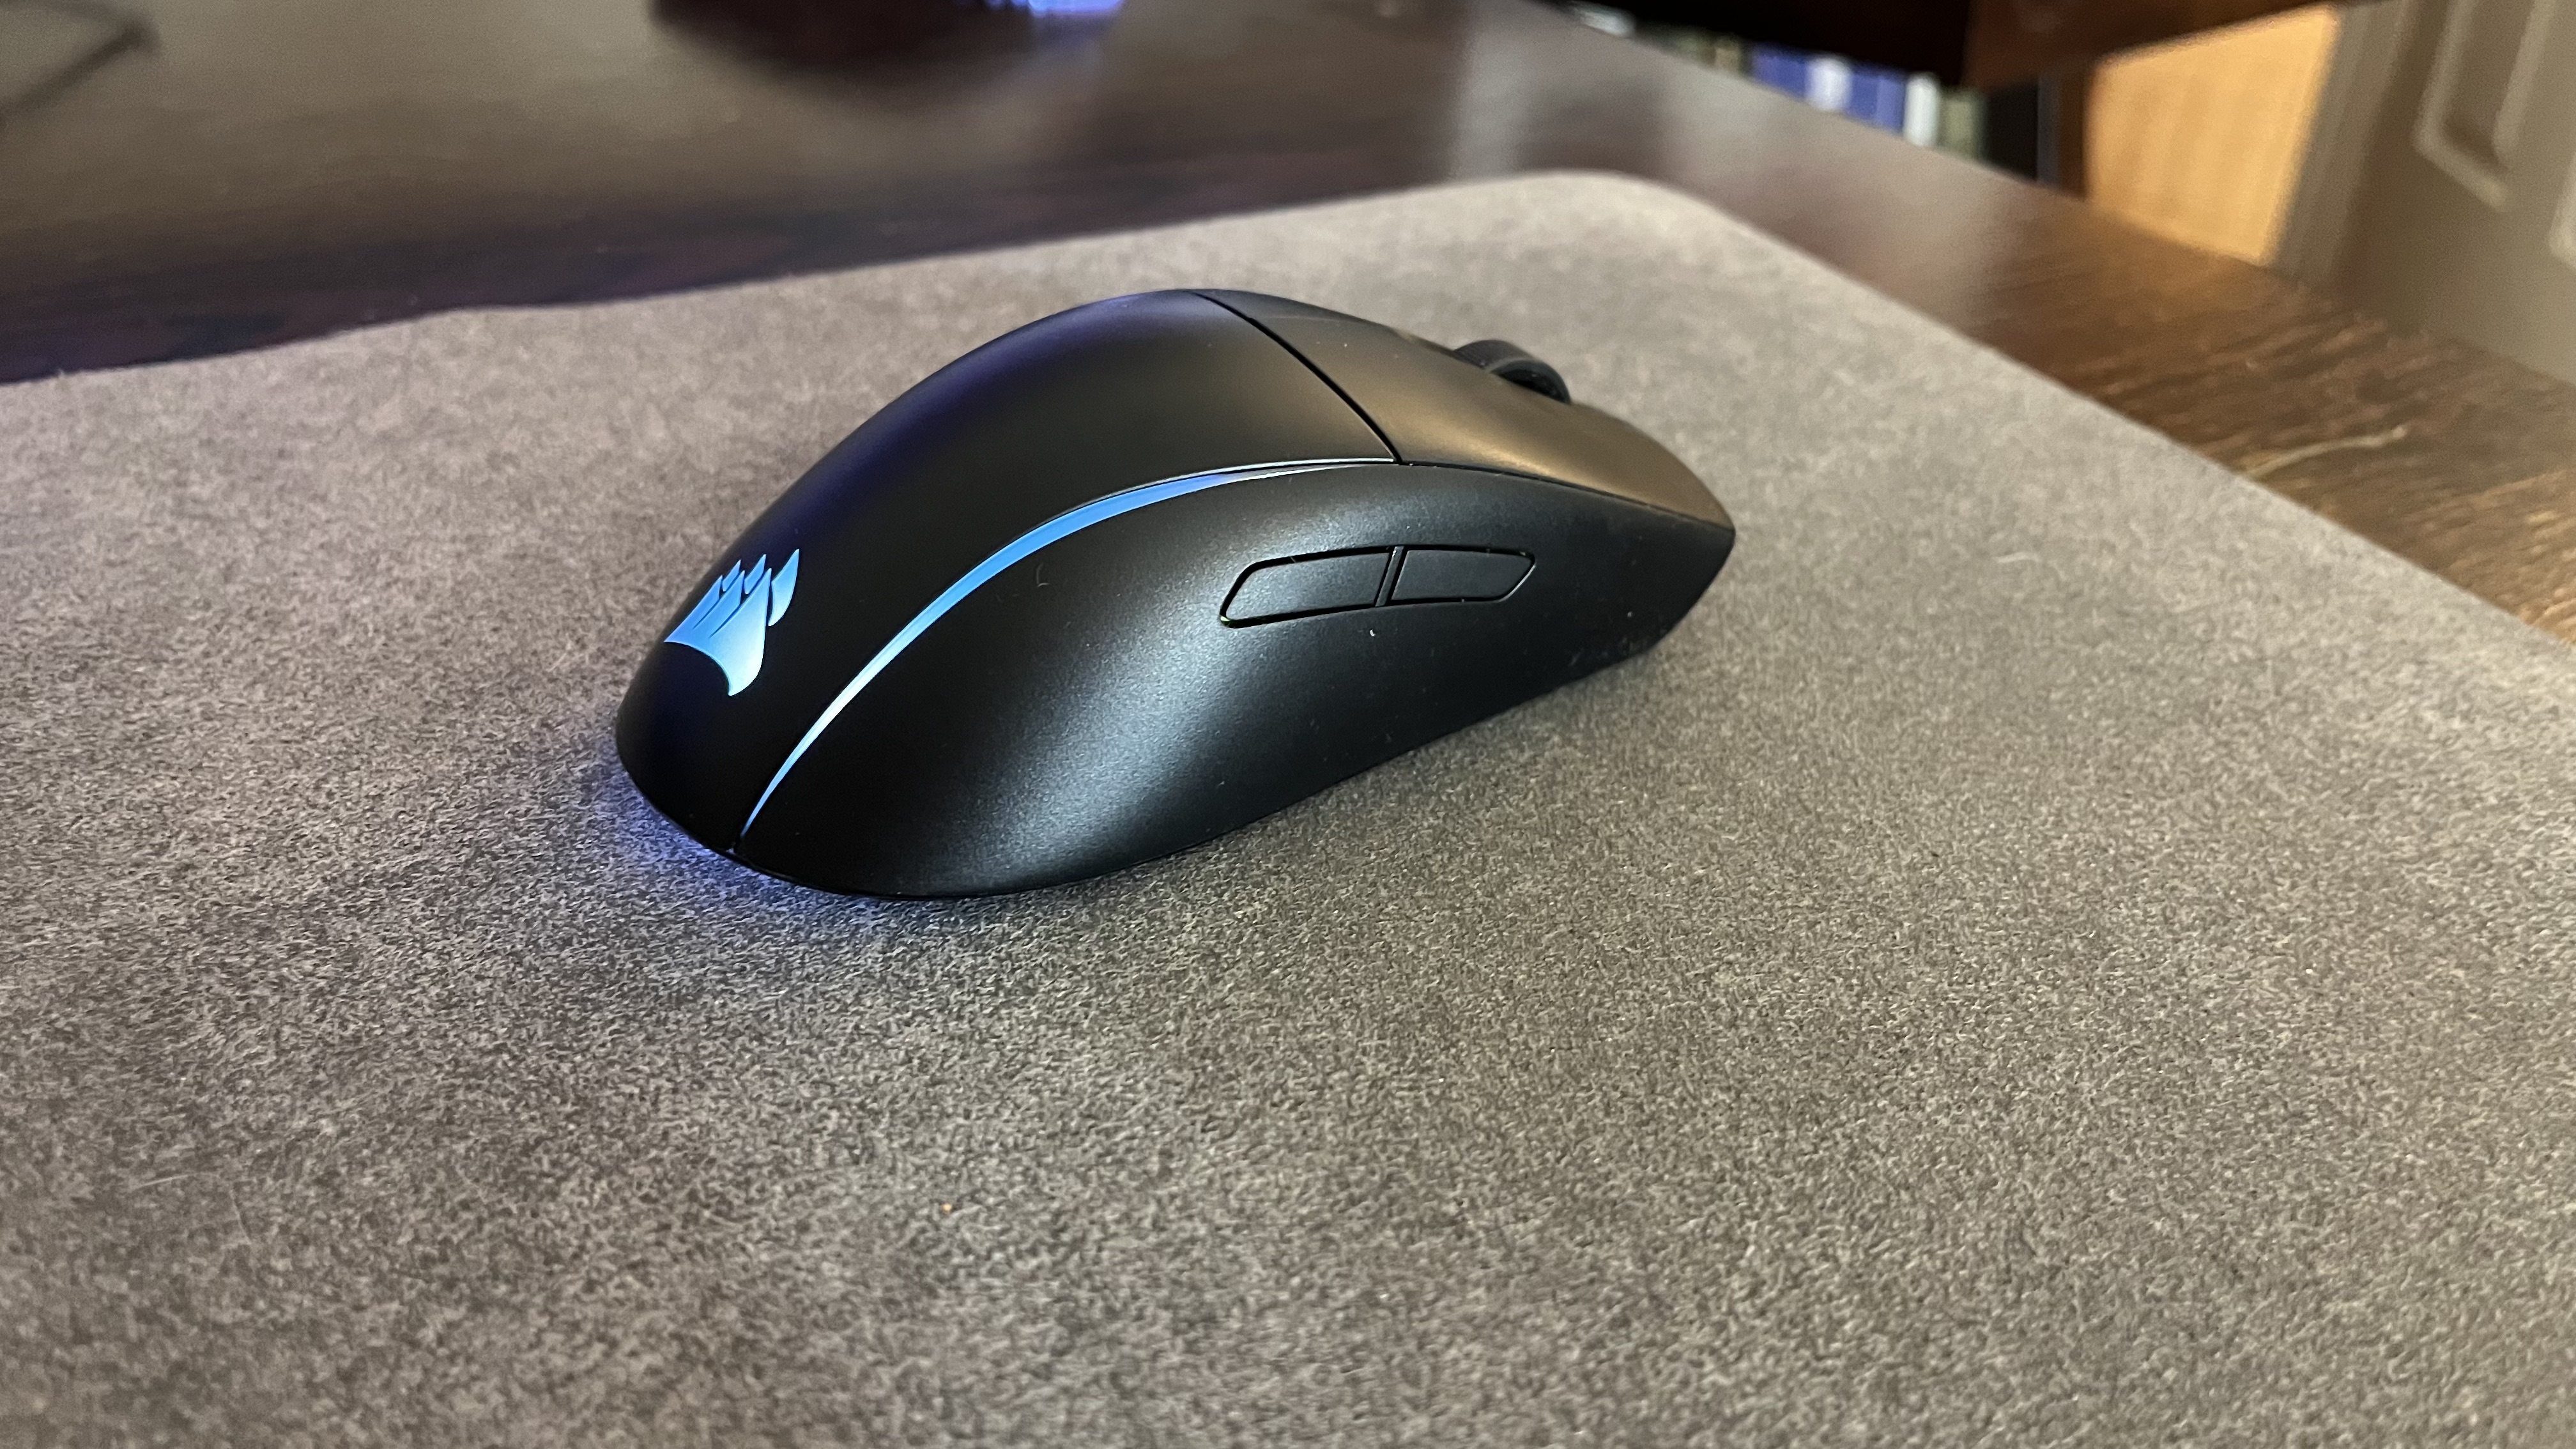 Corsair M75 gaming mouse in action